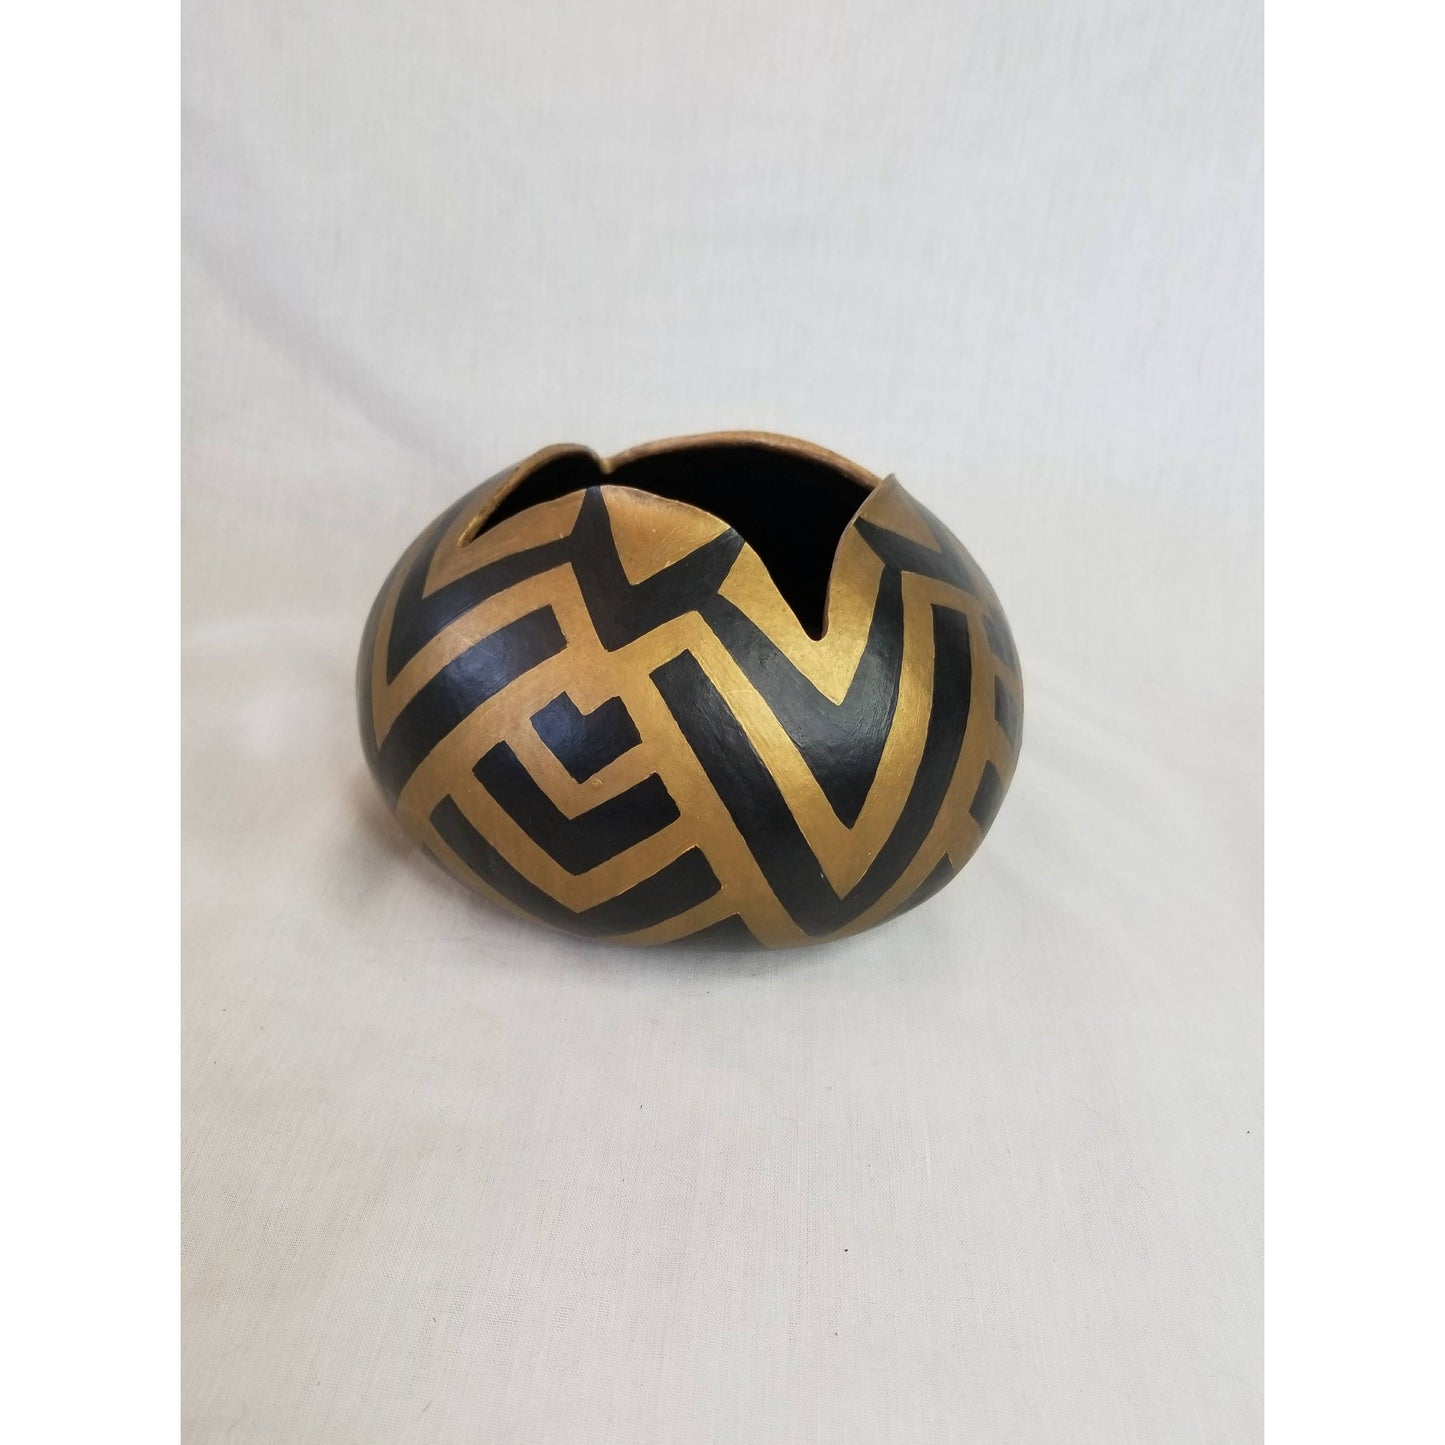 Tribal Gourd Bowl Artist Made ~ Hand Painted Gourd ~ Signed "M. Landsiedel" ~ Tribal ~ Geometric ~ Home Décor